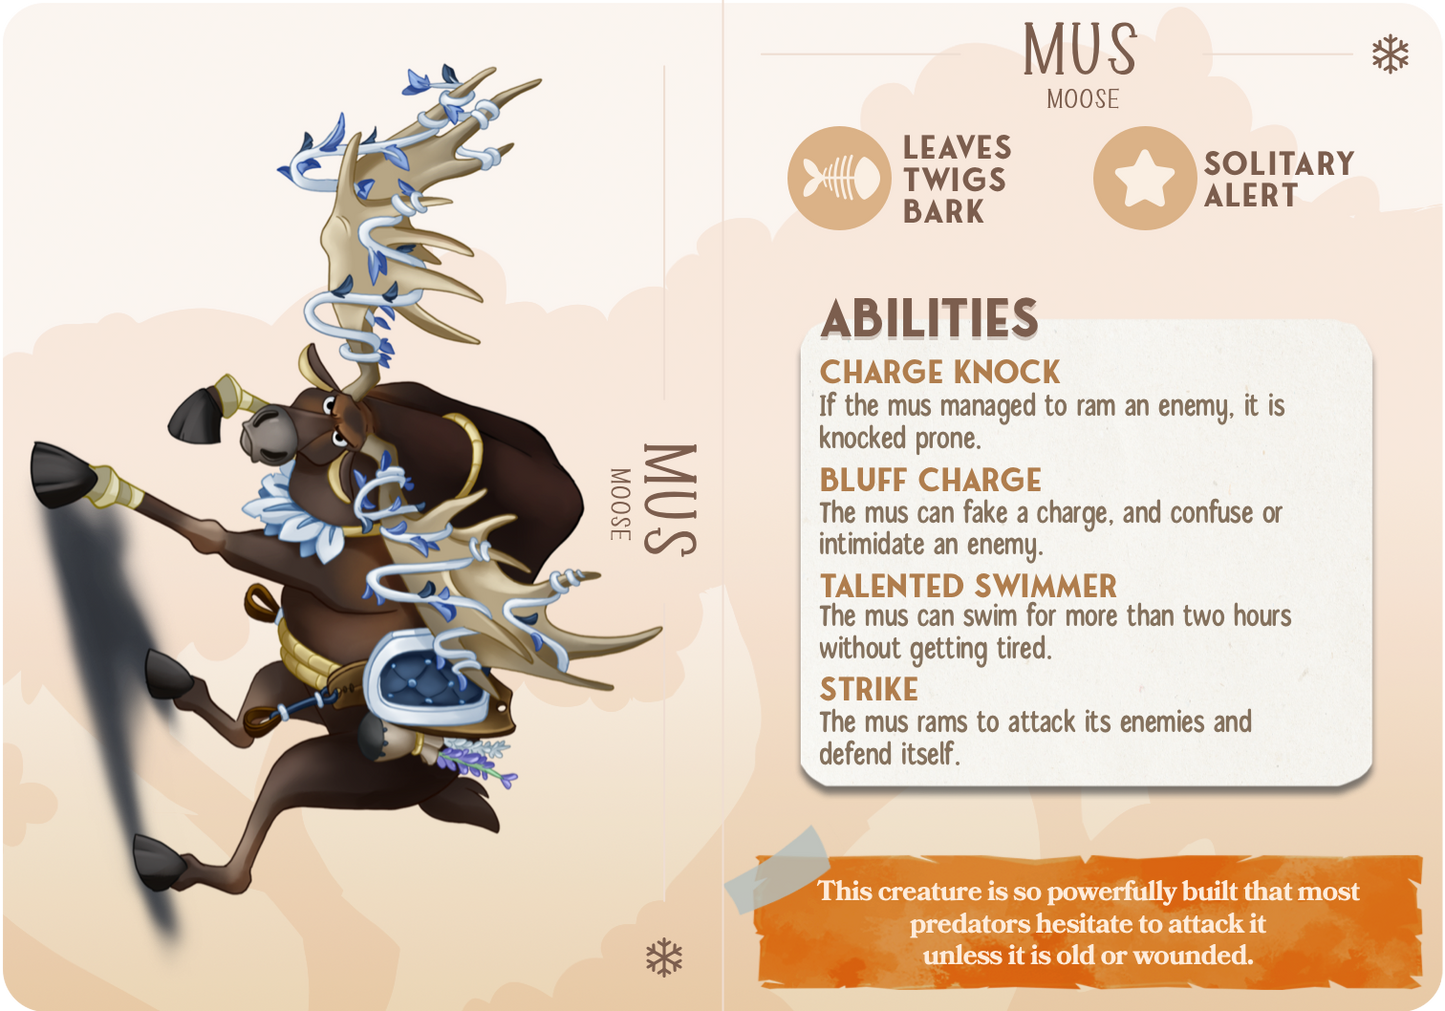 Mus the Moose - Companions - Polar - For D&D Campaigns & Tabletop Games